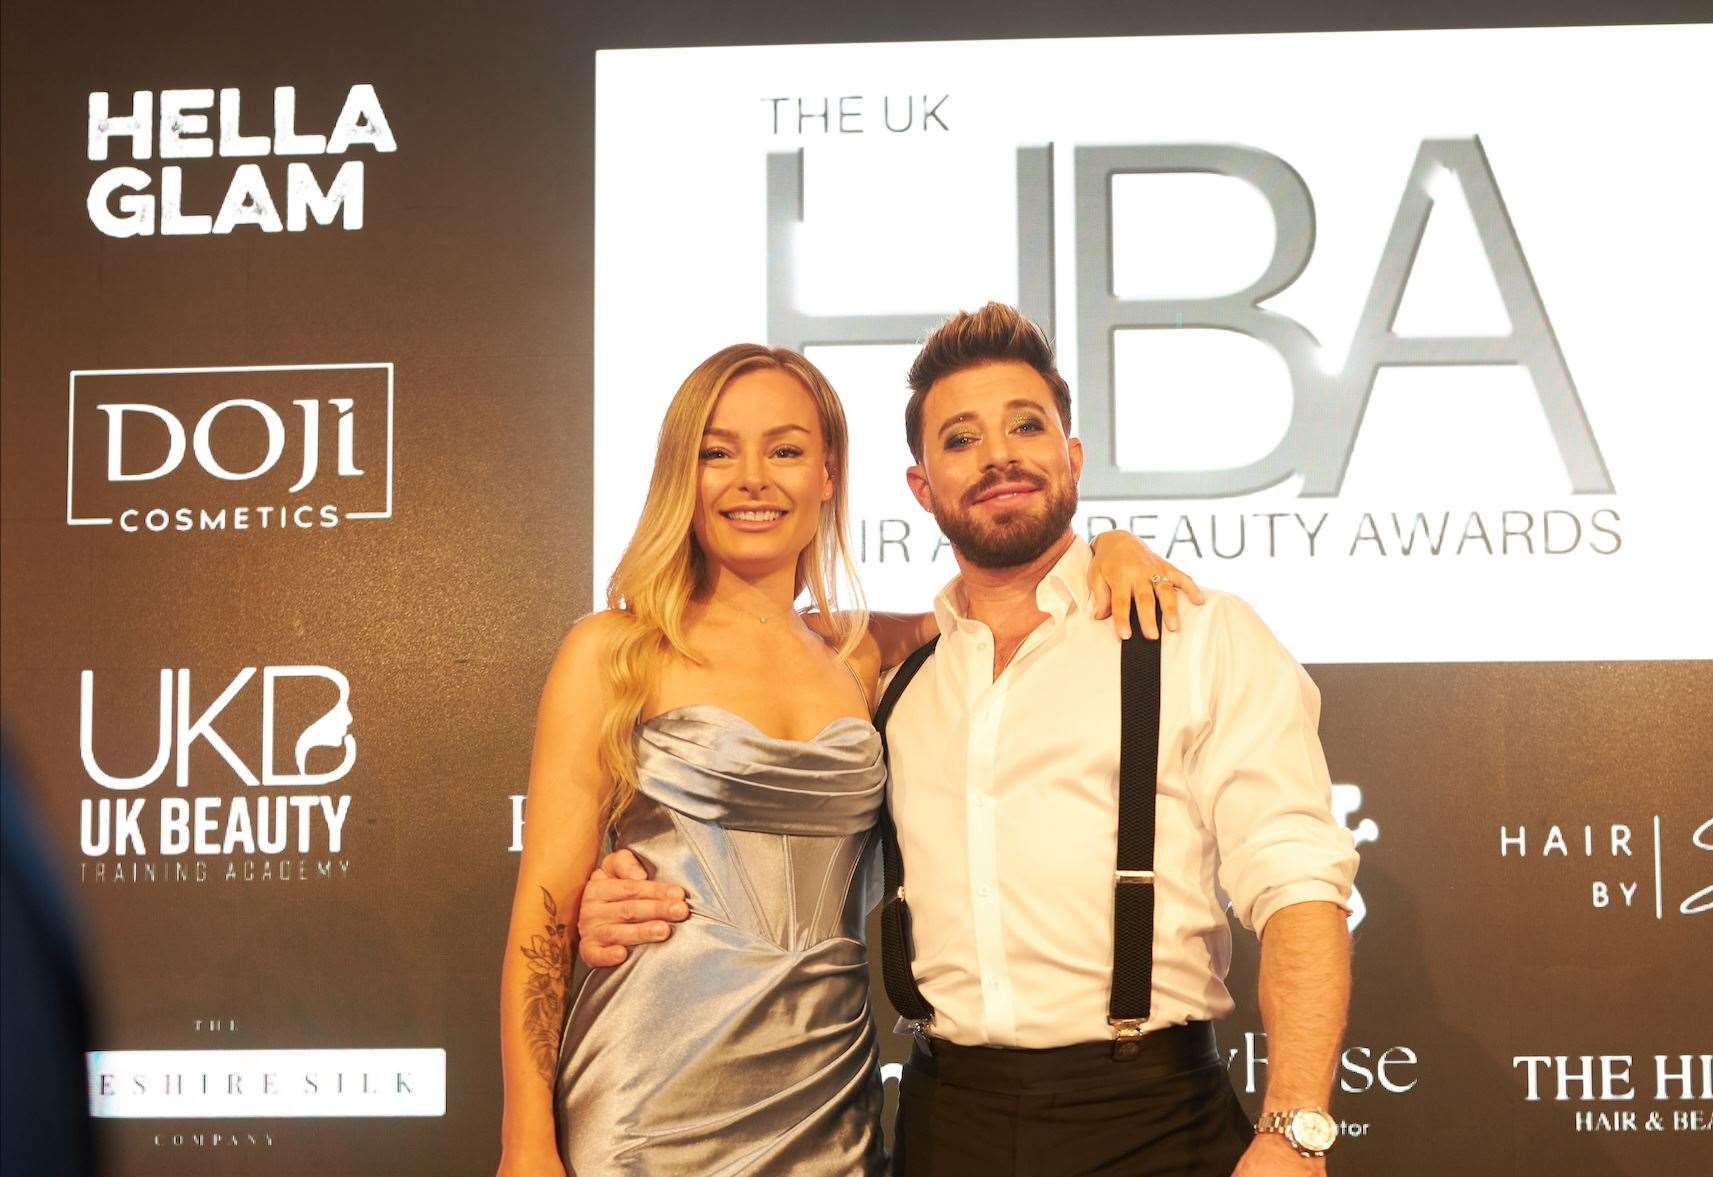 Inverness lash artist all of a flutter after UK Hair and Beauty awards win – and a meeting with Duncan James from Blue